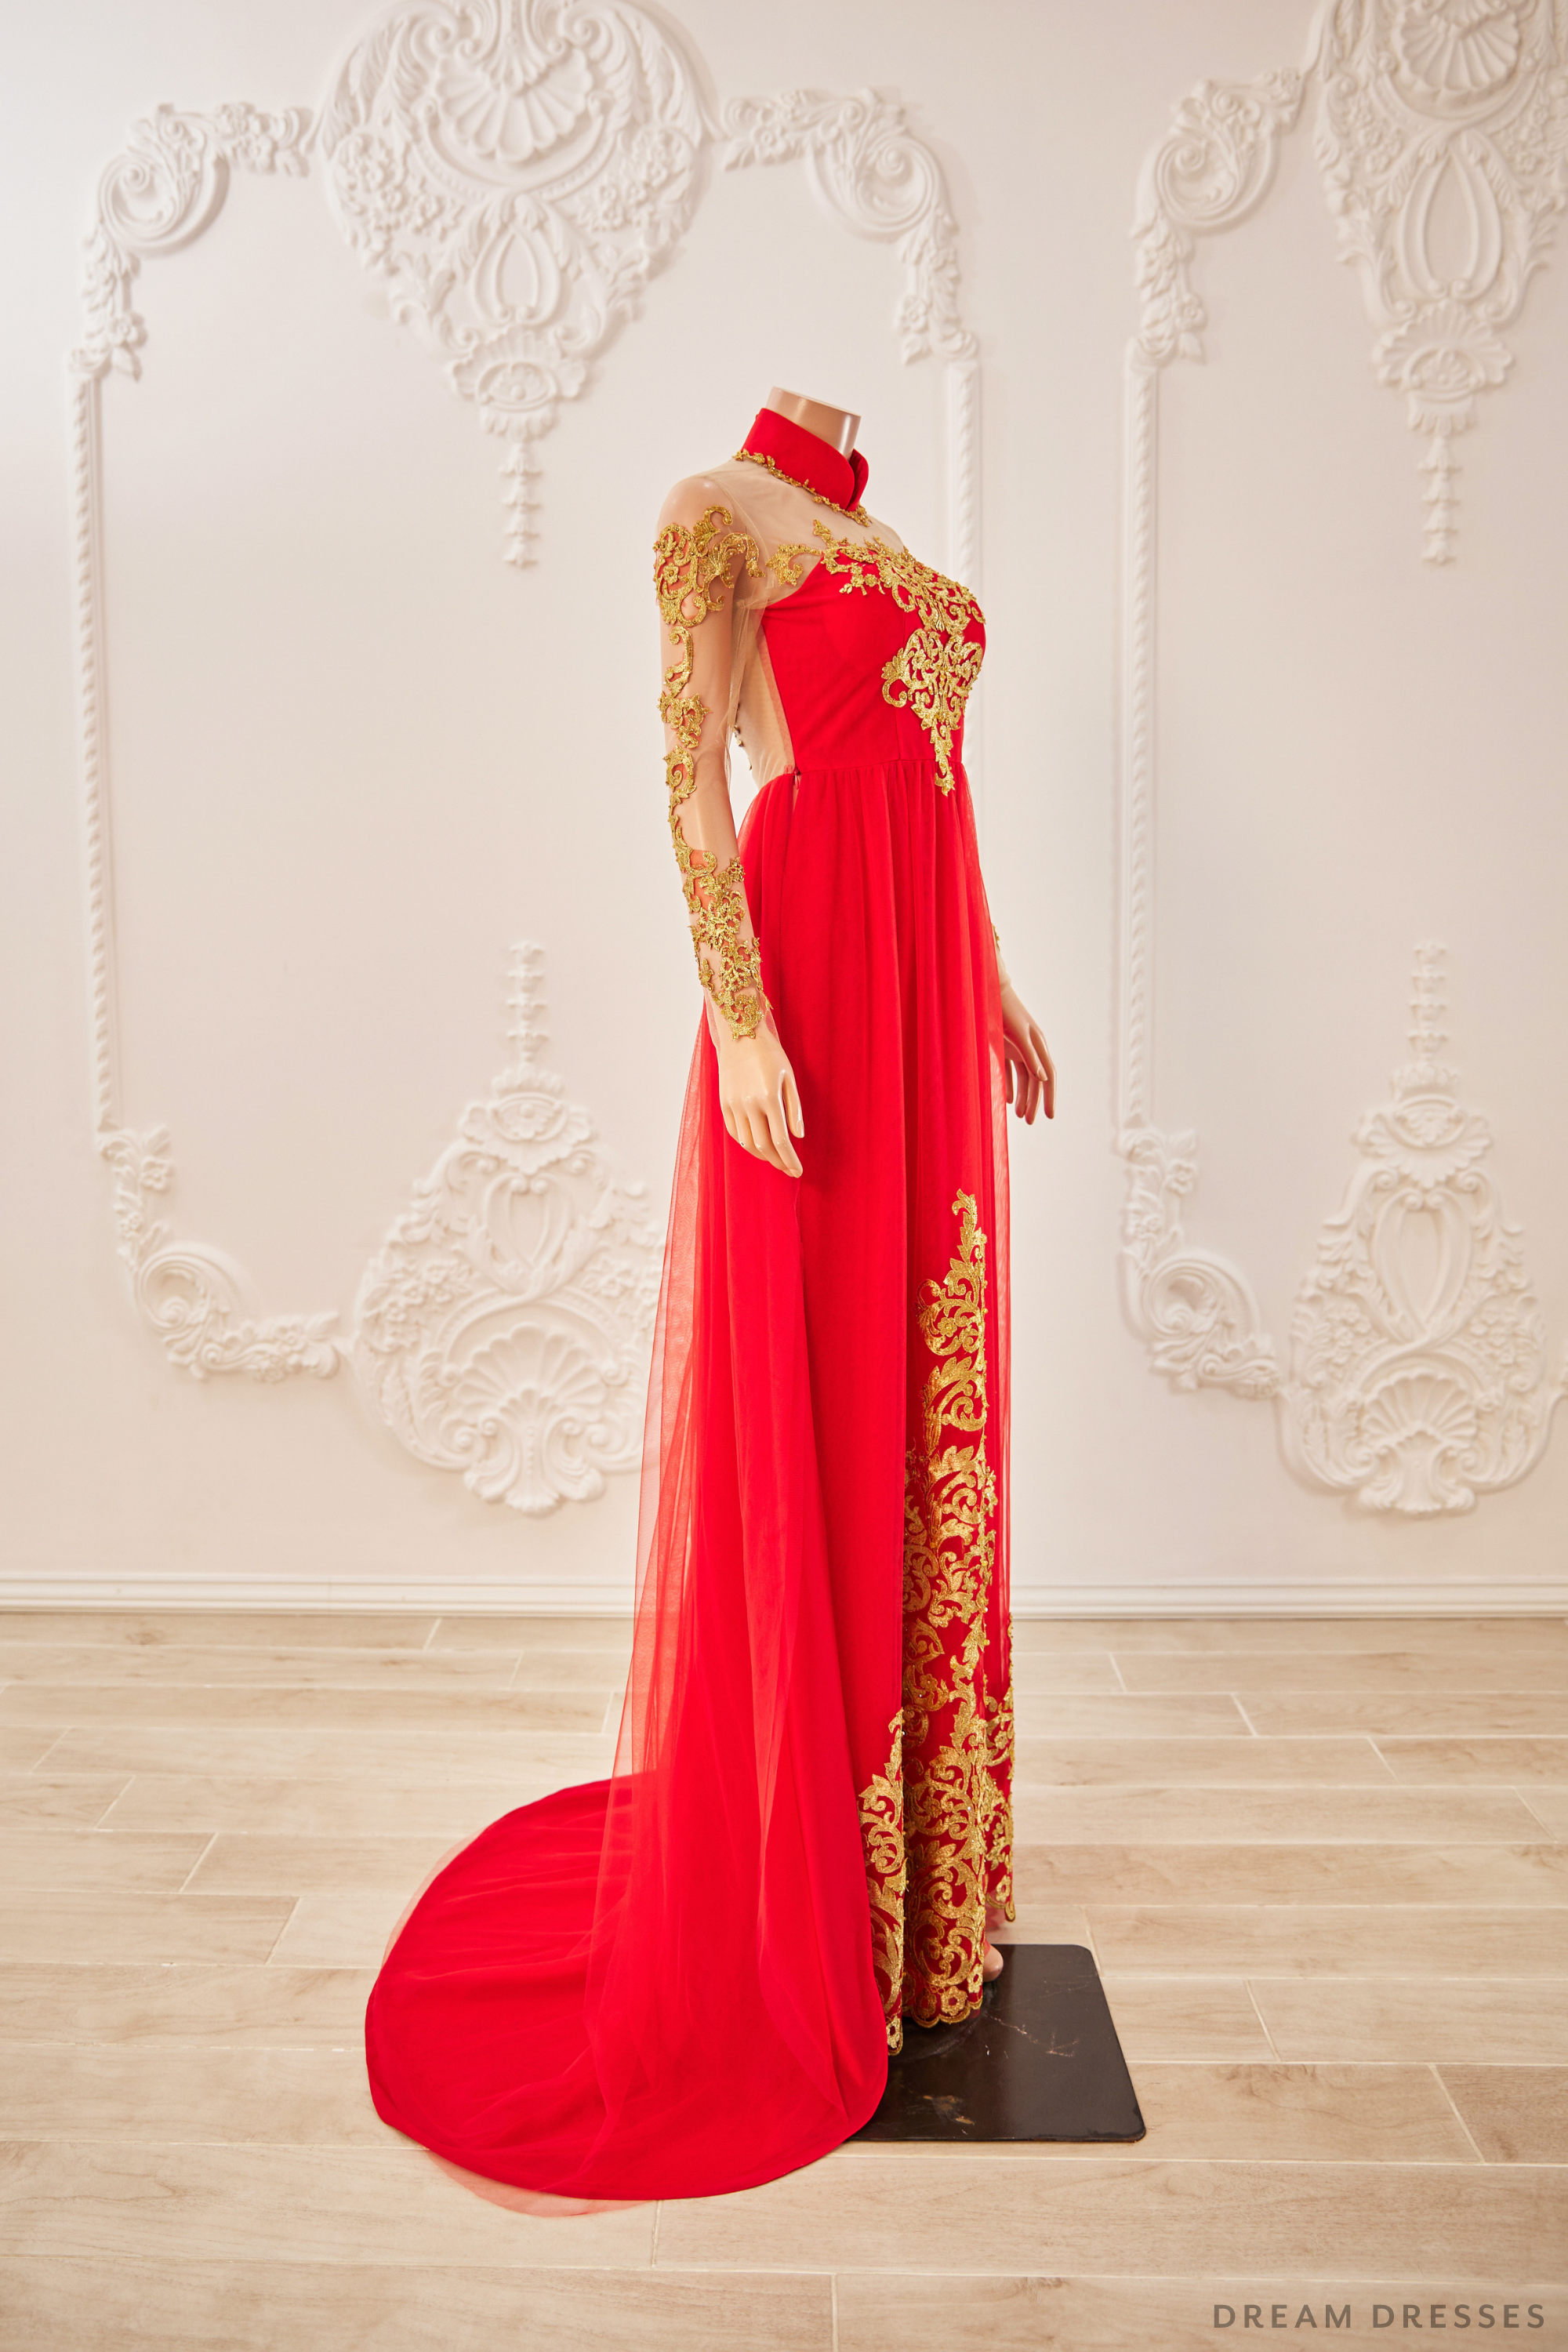 Red Bridal Ao Dai | Vietnamese Traditional Bridal Dress with Gold Lace |  Dream Dresses by P.M.N.